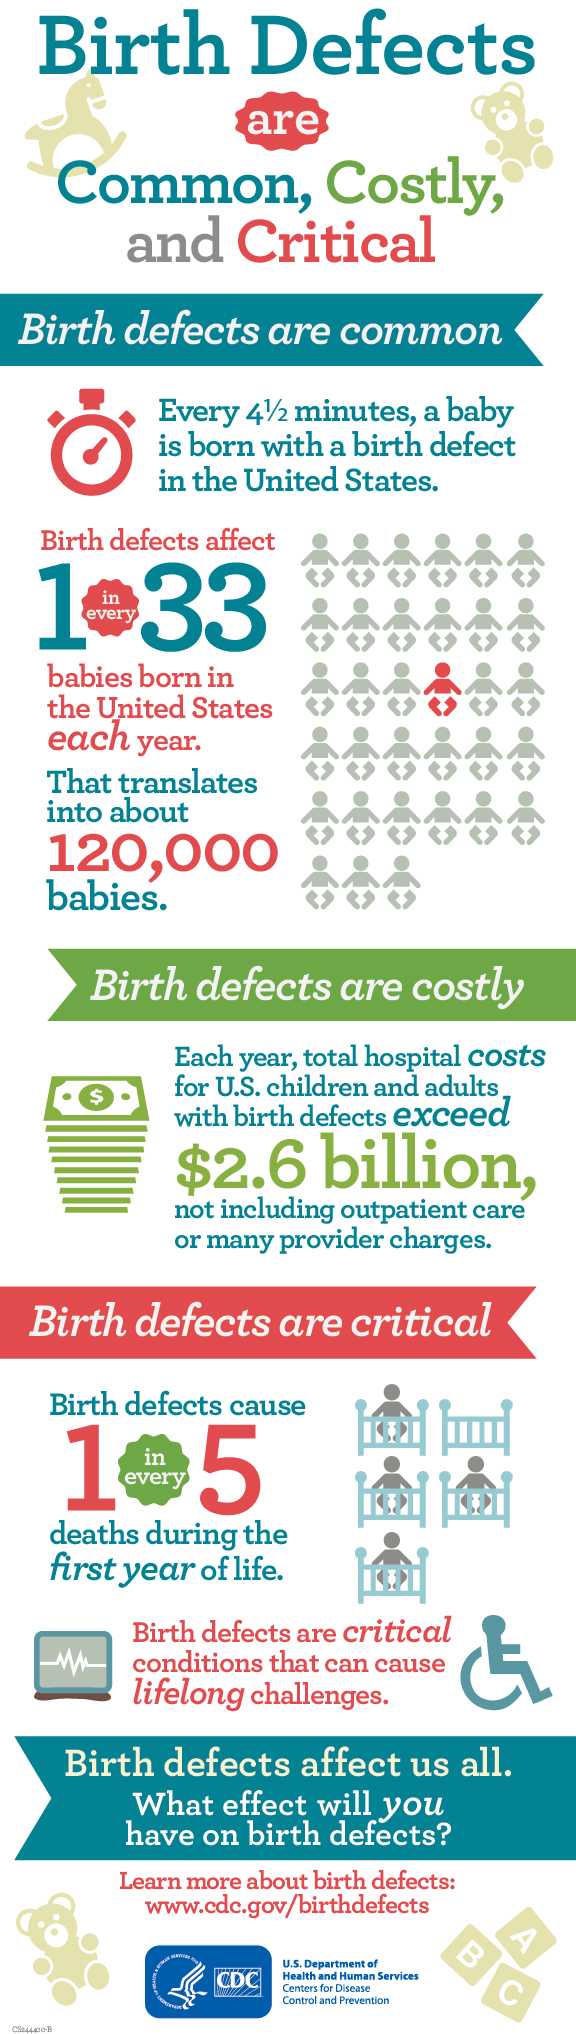 Birth Defects Infographic